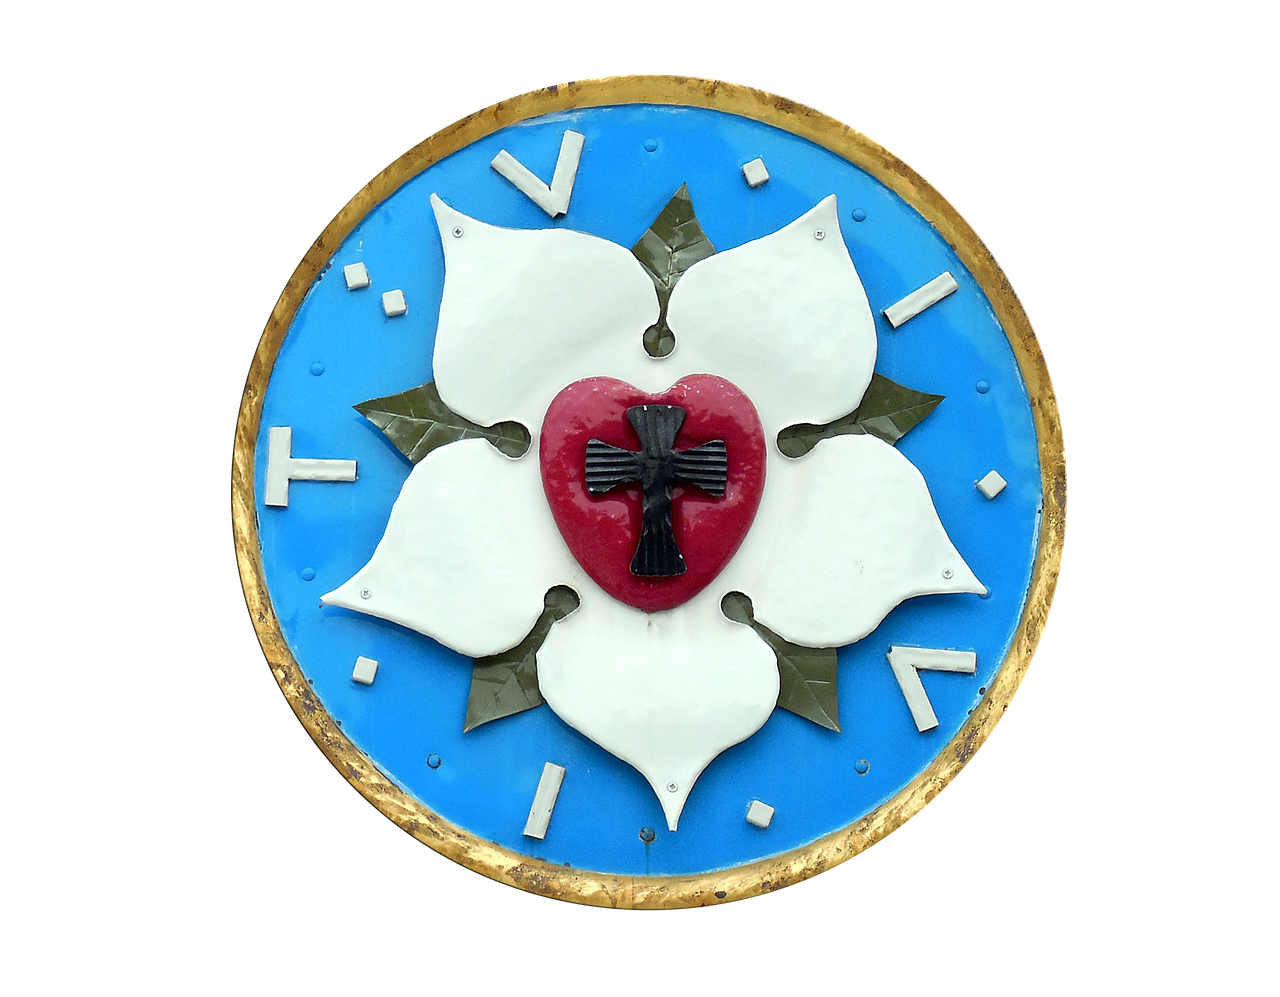 A Blue And Gold Circular Object With A Red Heart And A Black Cross In The Middle